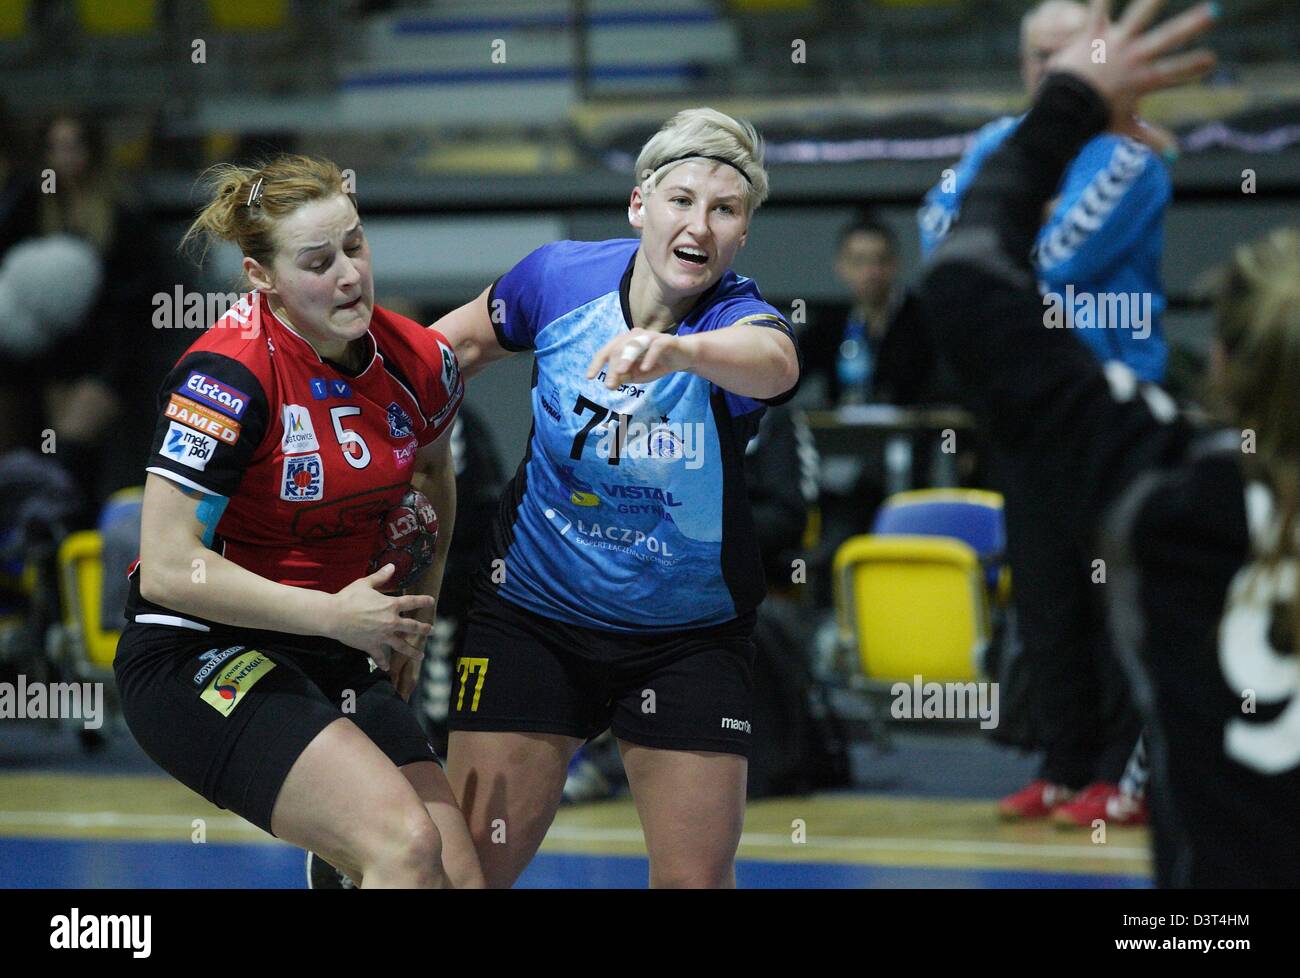 Poland 24th, February 2013 Handball: Final Four of the PGNiG Polish Cup. Vistal Laczpol Gdynia v KPR Ruch Chorzow game for 3th place in the Cup at HSW sports hall in Gdynia. Kulwinska Patrycja (77)  in action during the game Stock Photo